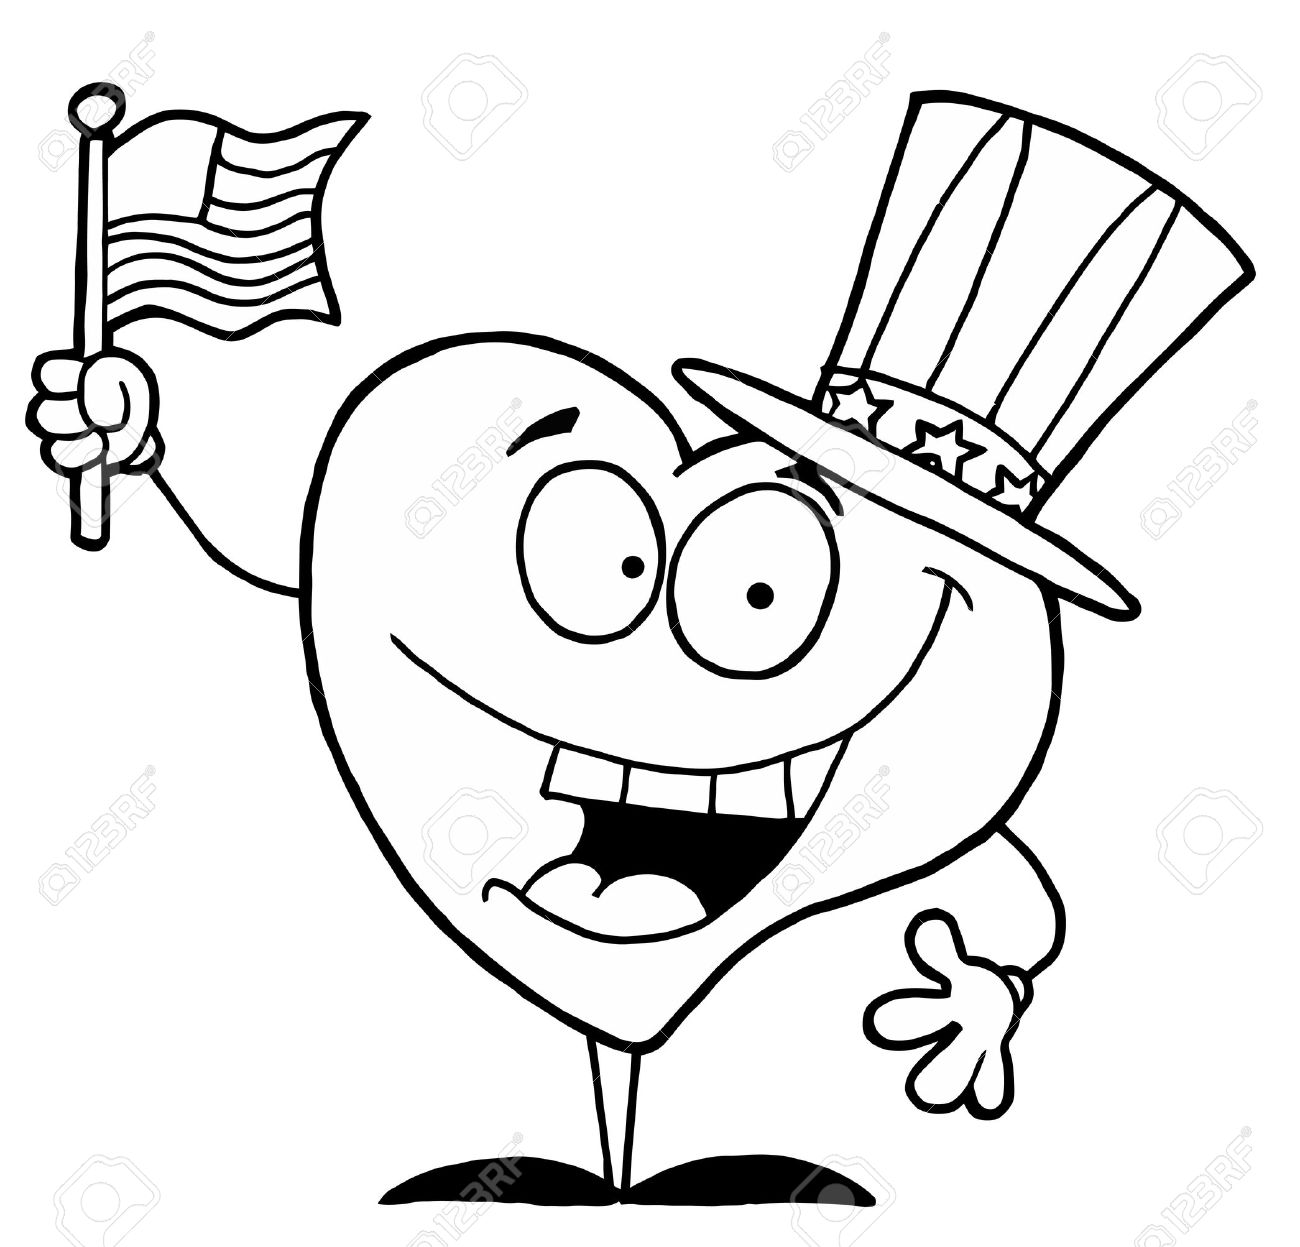 Black and white coloring page outline of a heart uncle sam royalty free svg cliparts vectors and stock illustration image